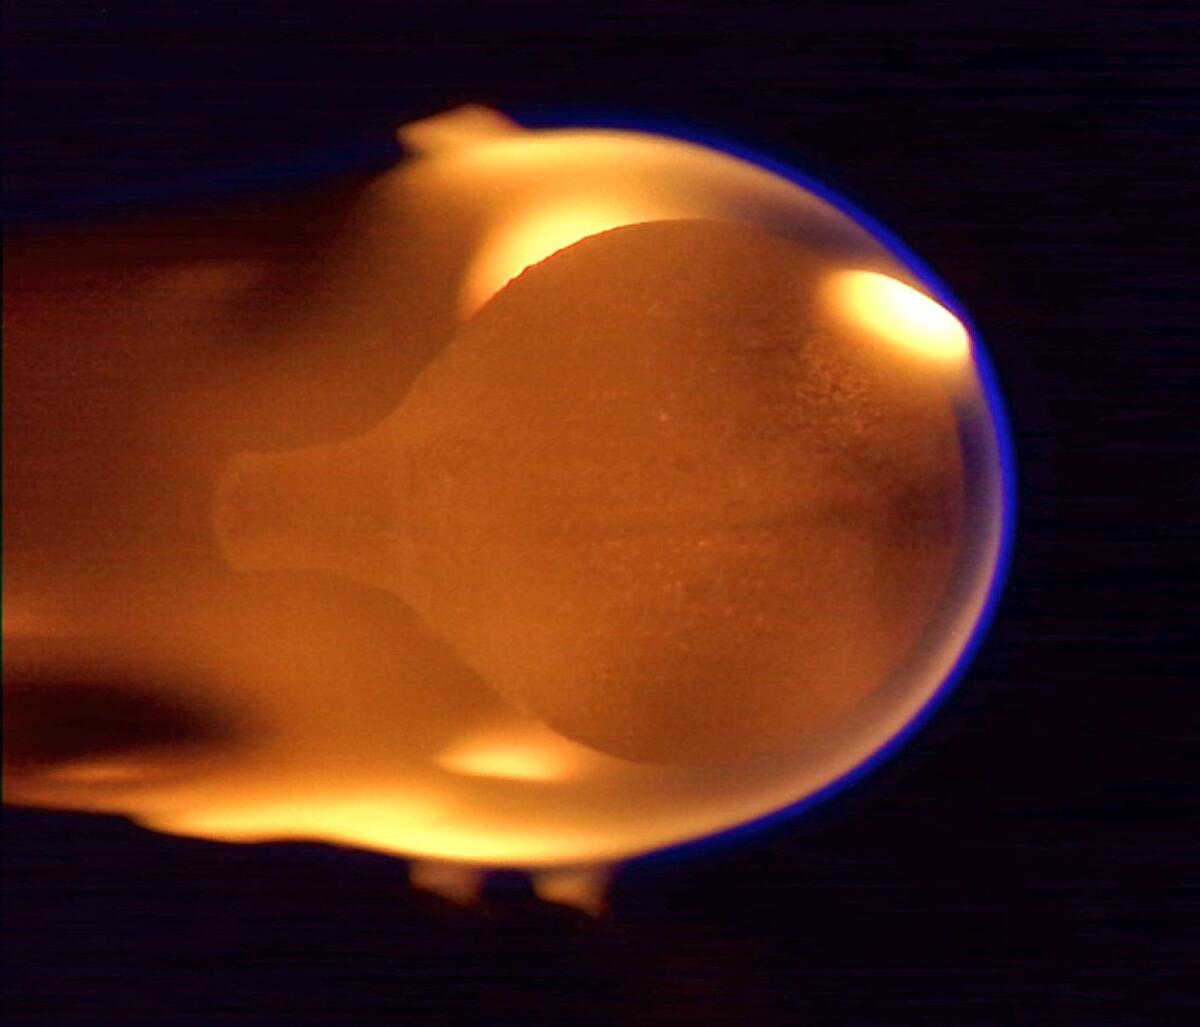 A flame from acrylic burning in microgravity for the first test of SoFIE-GEL on January 13, 2023. Credit: Nasa